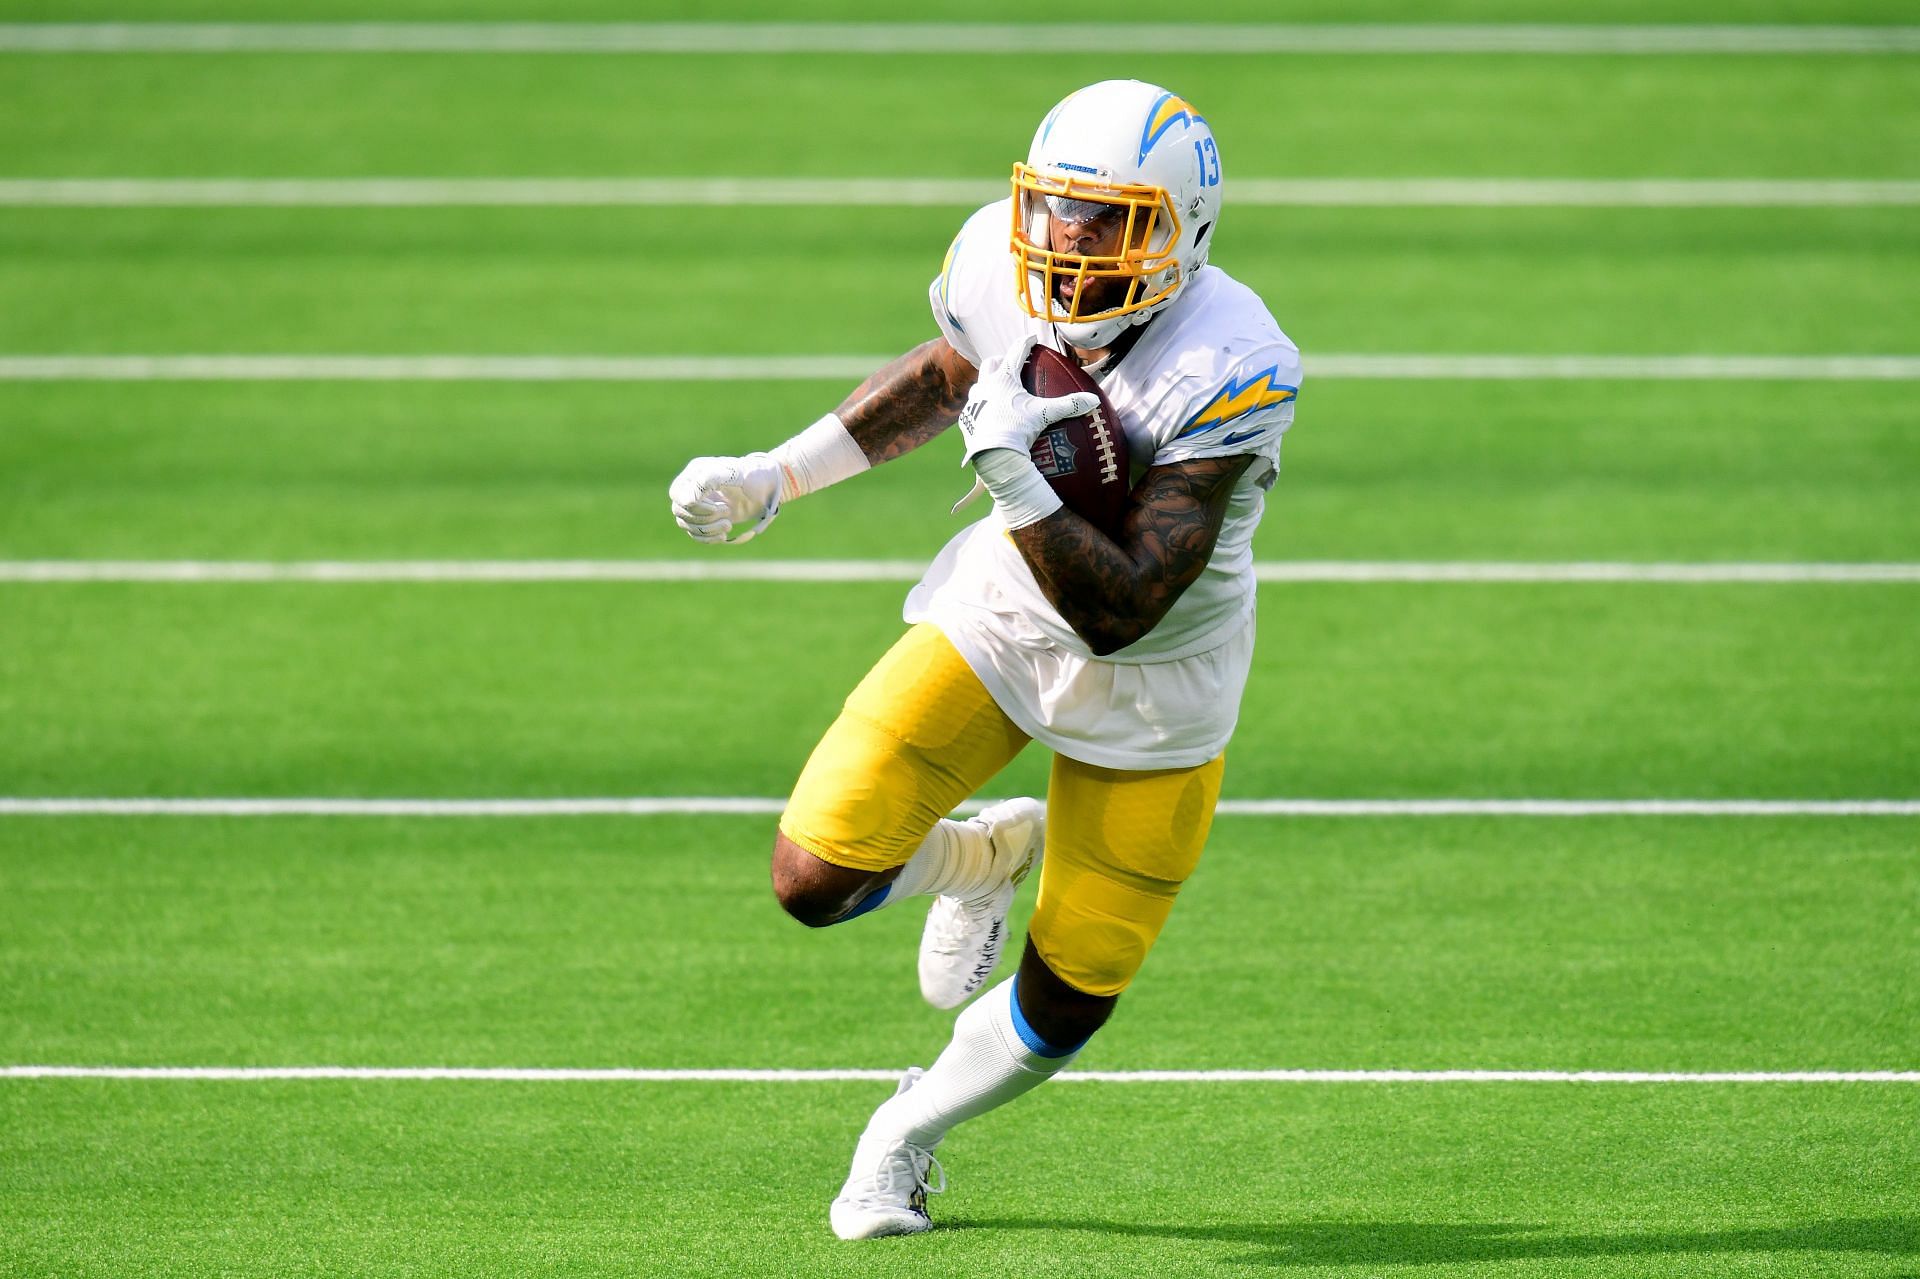 Los Angeles Chargers WR Keenan Allen